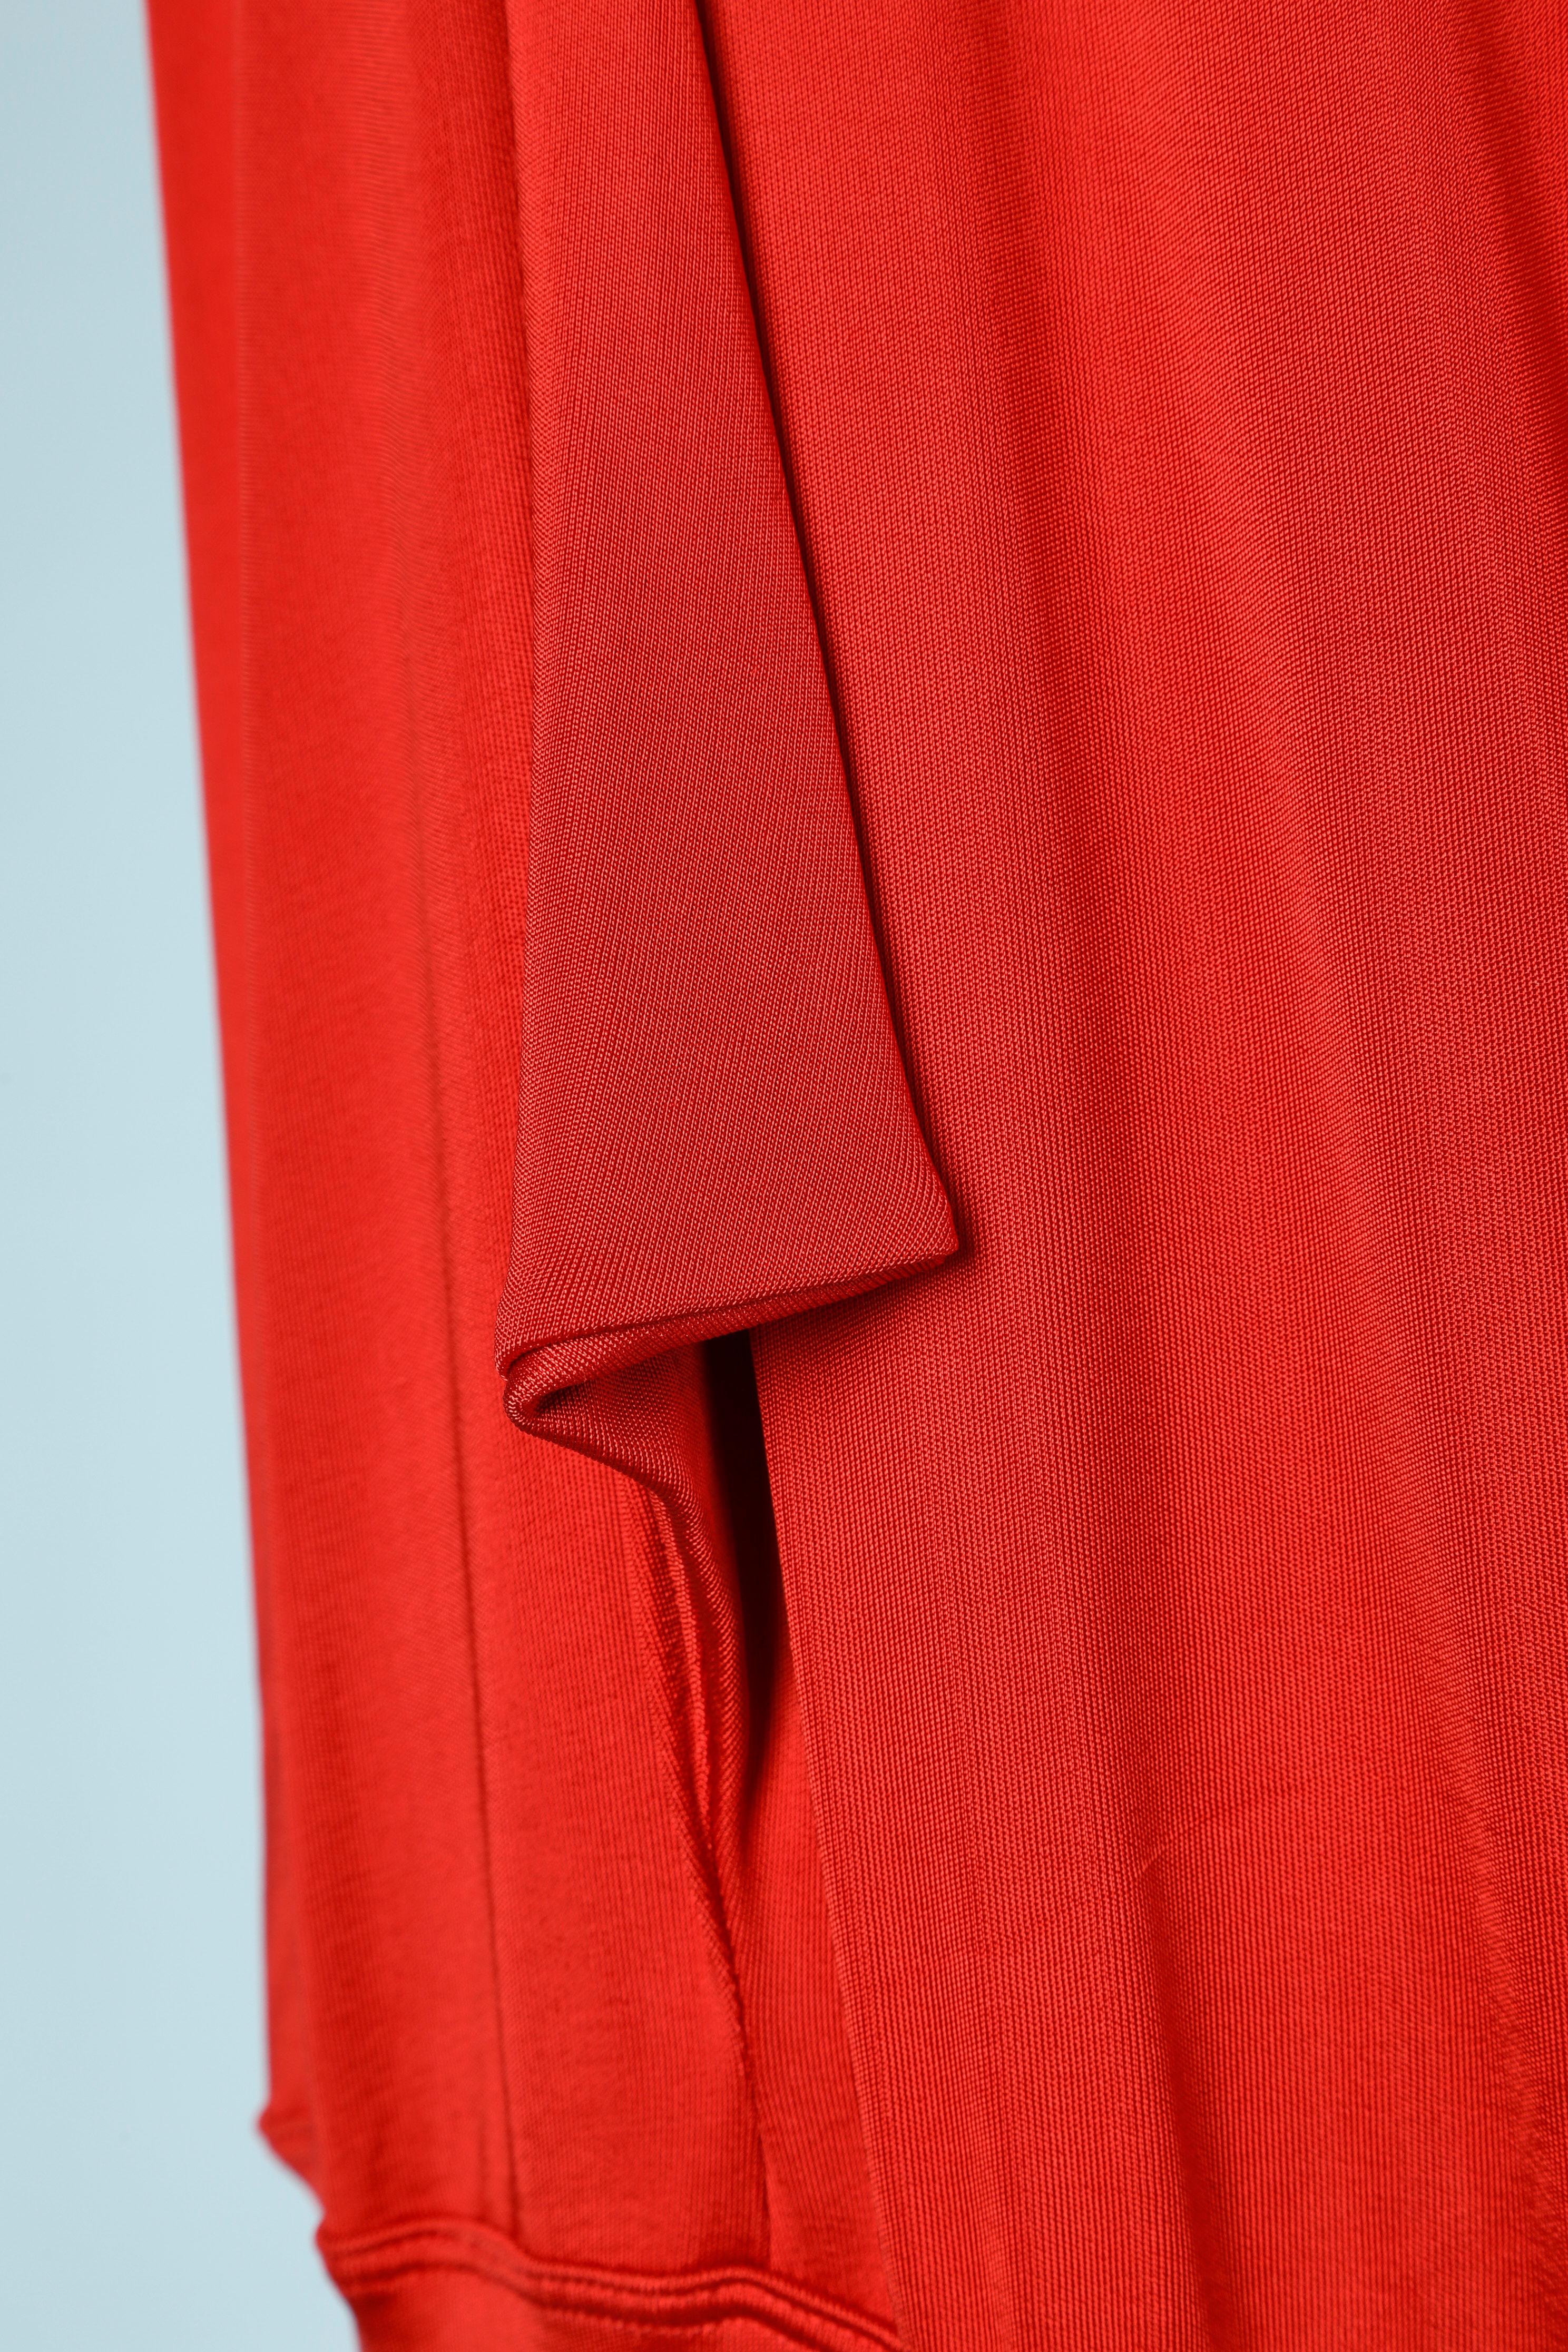 Red rayon asymmetrical dress. Fabric composition: 96% rayon, 4% elastane 
NEW with tag. Cut work on the hips.
SIZE M